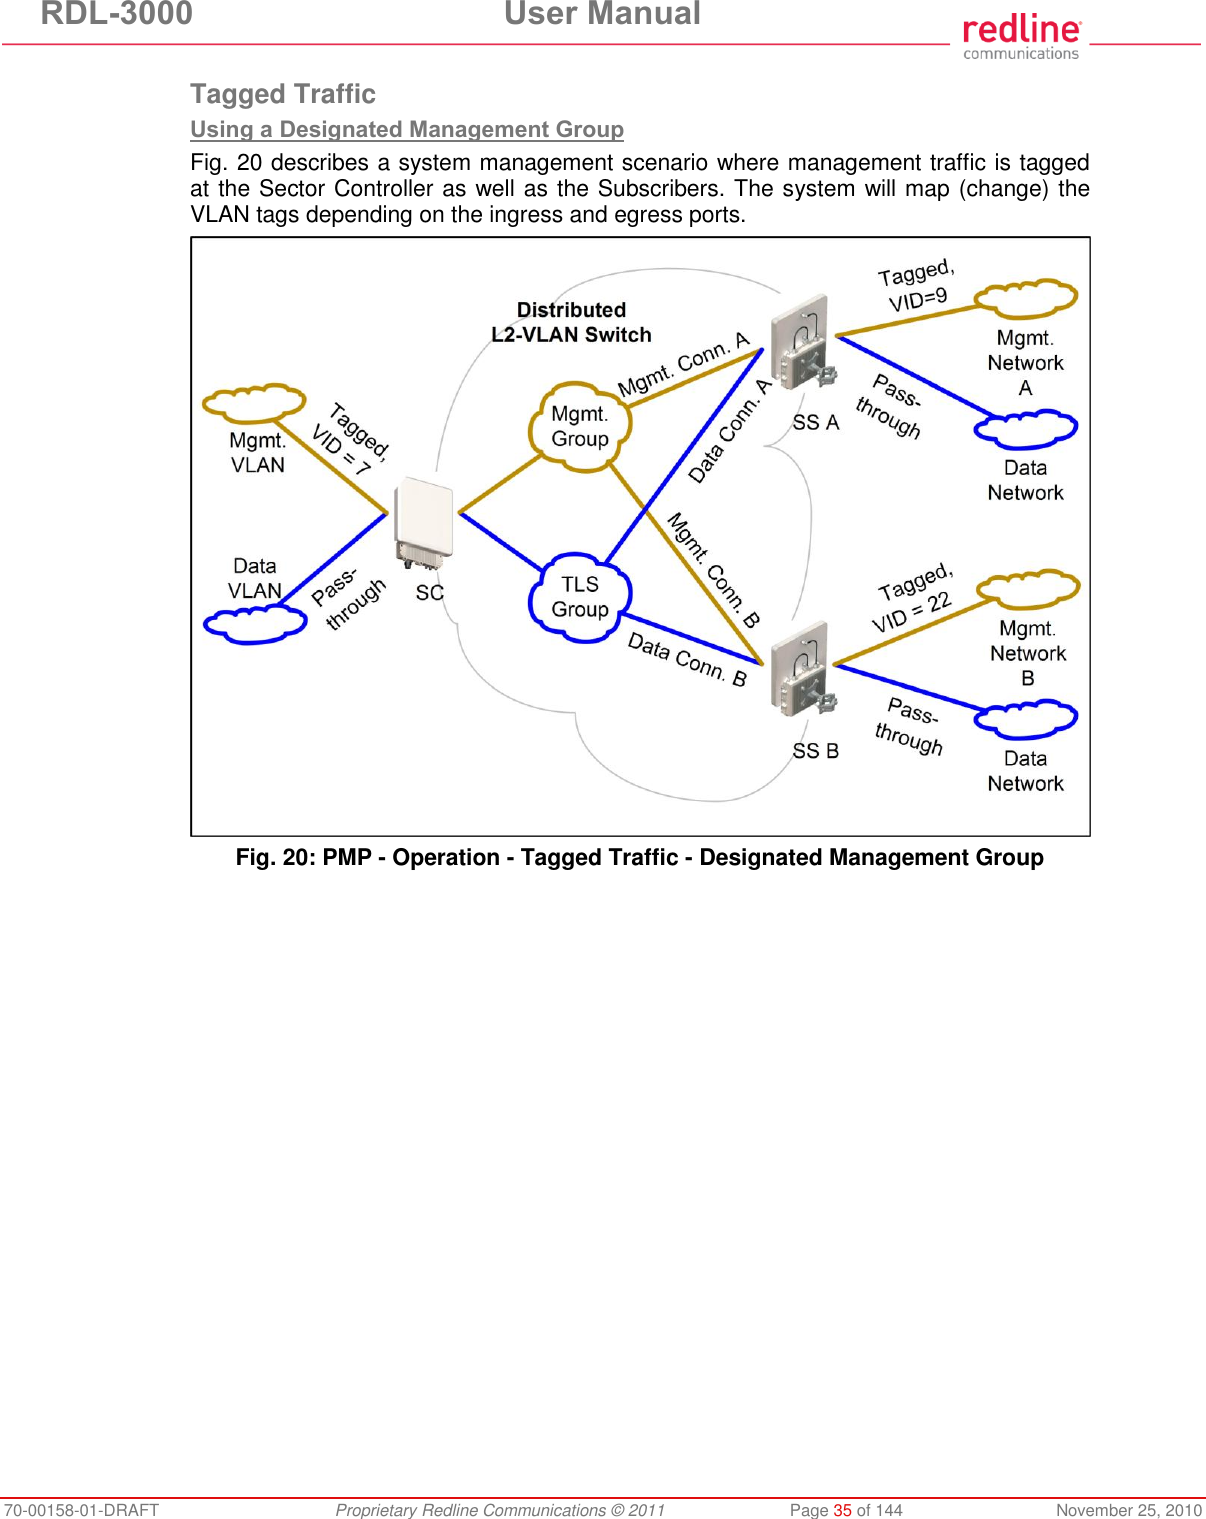 RDL-3000  User Manual 70-00158-01-DRAFT  Proprietary Redline Communications © 2011  Page 35 of 144  November 25, 2010  Tagged Traffic Using a Designated Management Group Fig. 20 describes a system management scenario where management traffic is tagged at the Sector Controller as well as the Subscribers. The system will map (change) the VLAN tags depending on the ingress and egress ports.  Fig. 20: PMP - Operation - Tagged Traffic - Designated Management Group 